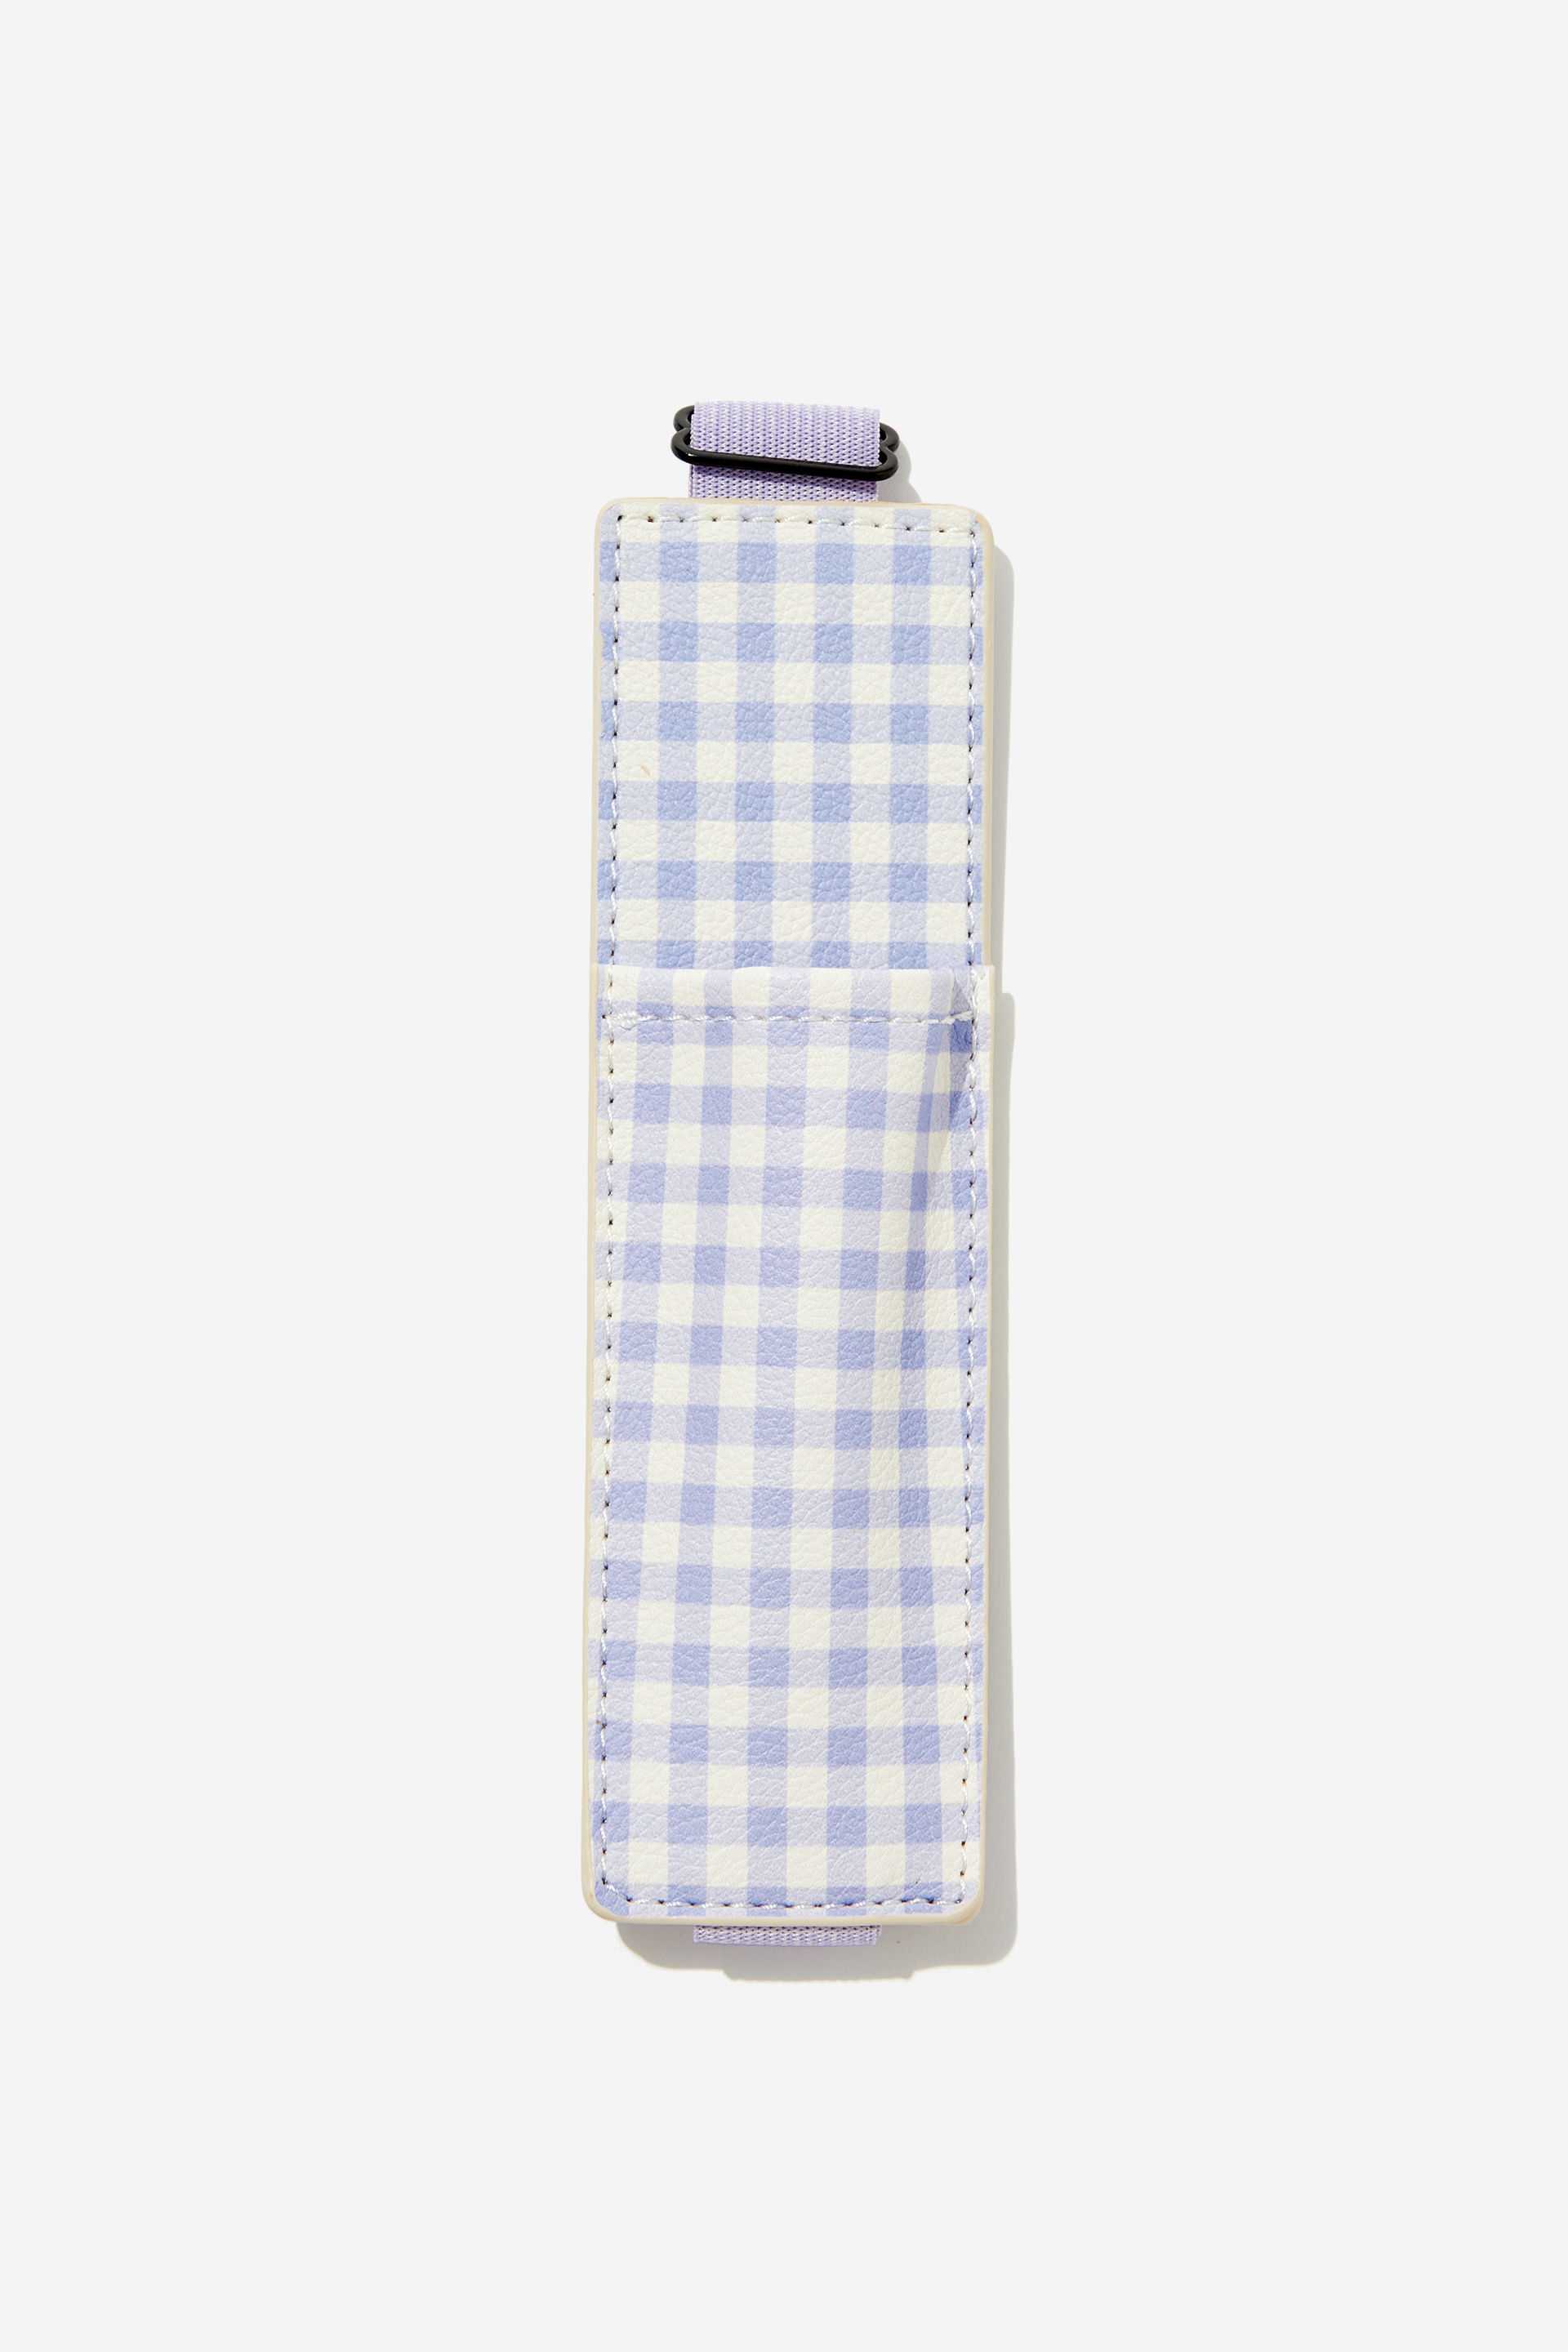 Typo - Notebook Pen Pouch - Soft lilac gingham